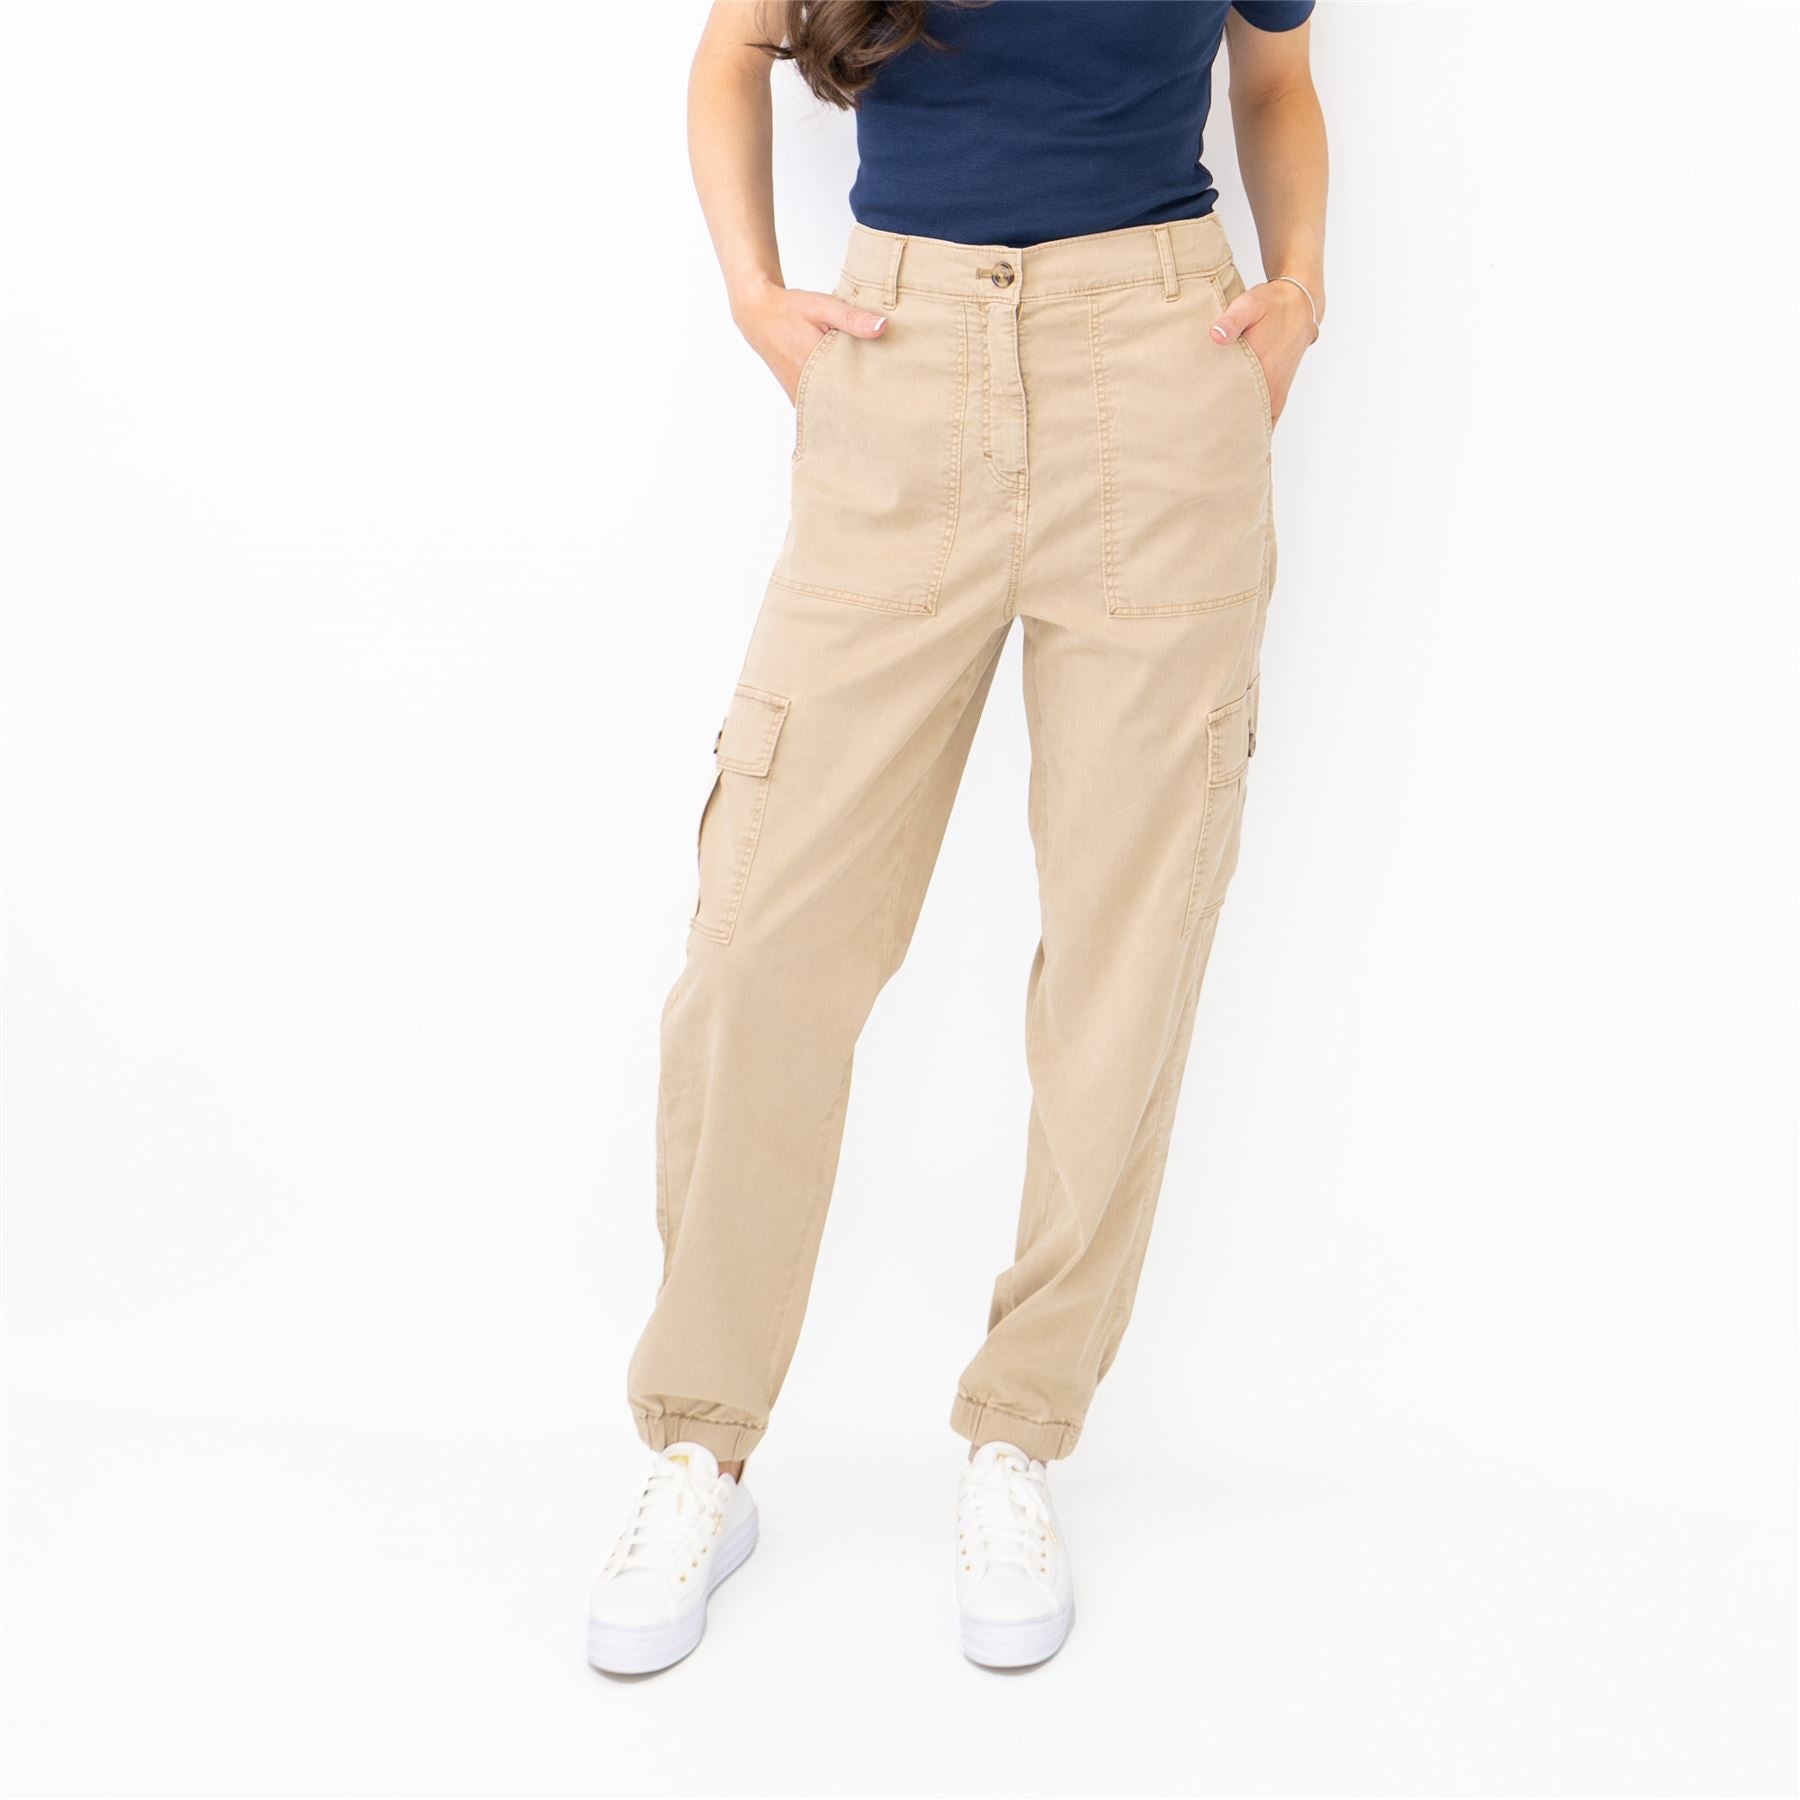 M&S Autograph Tan Beige Cargo Casual Trousers – Quality Brands Outlet